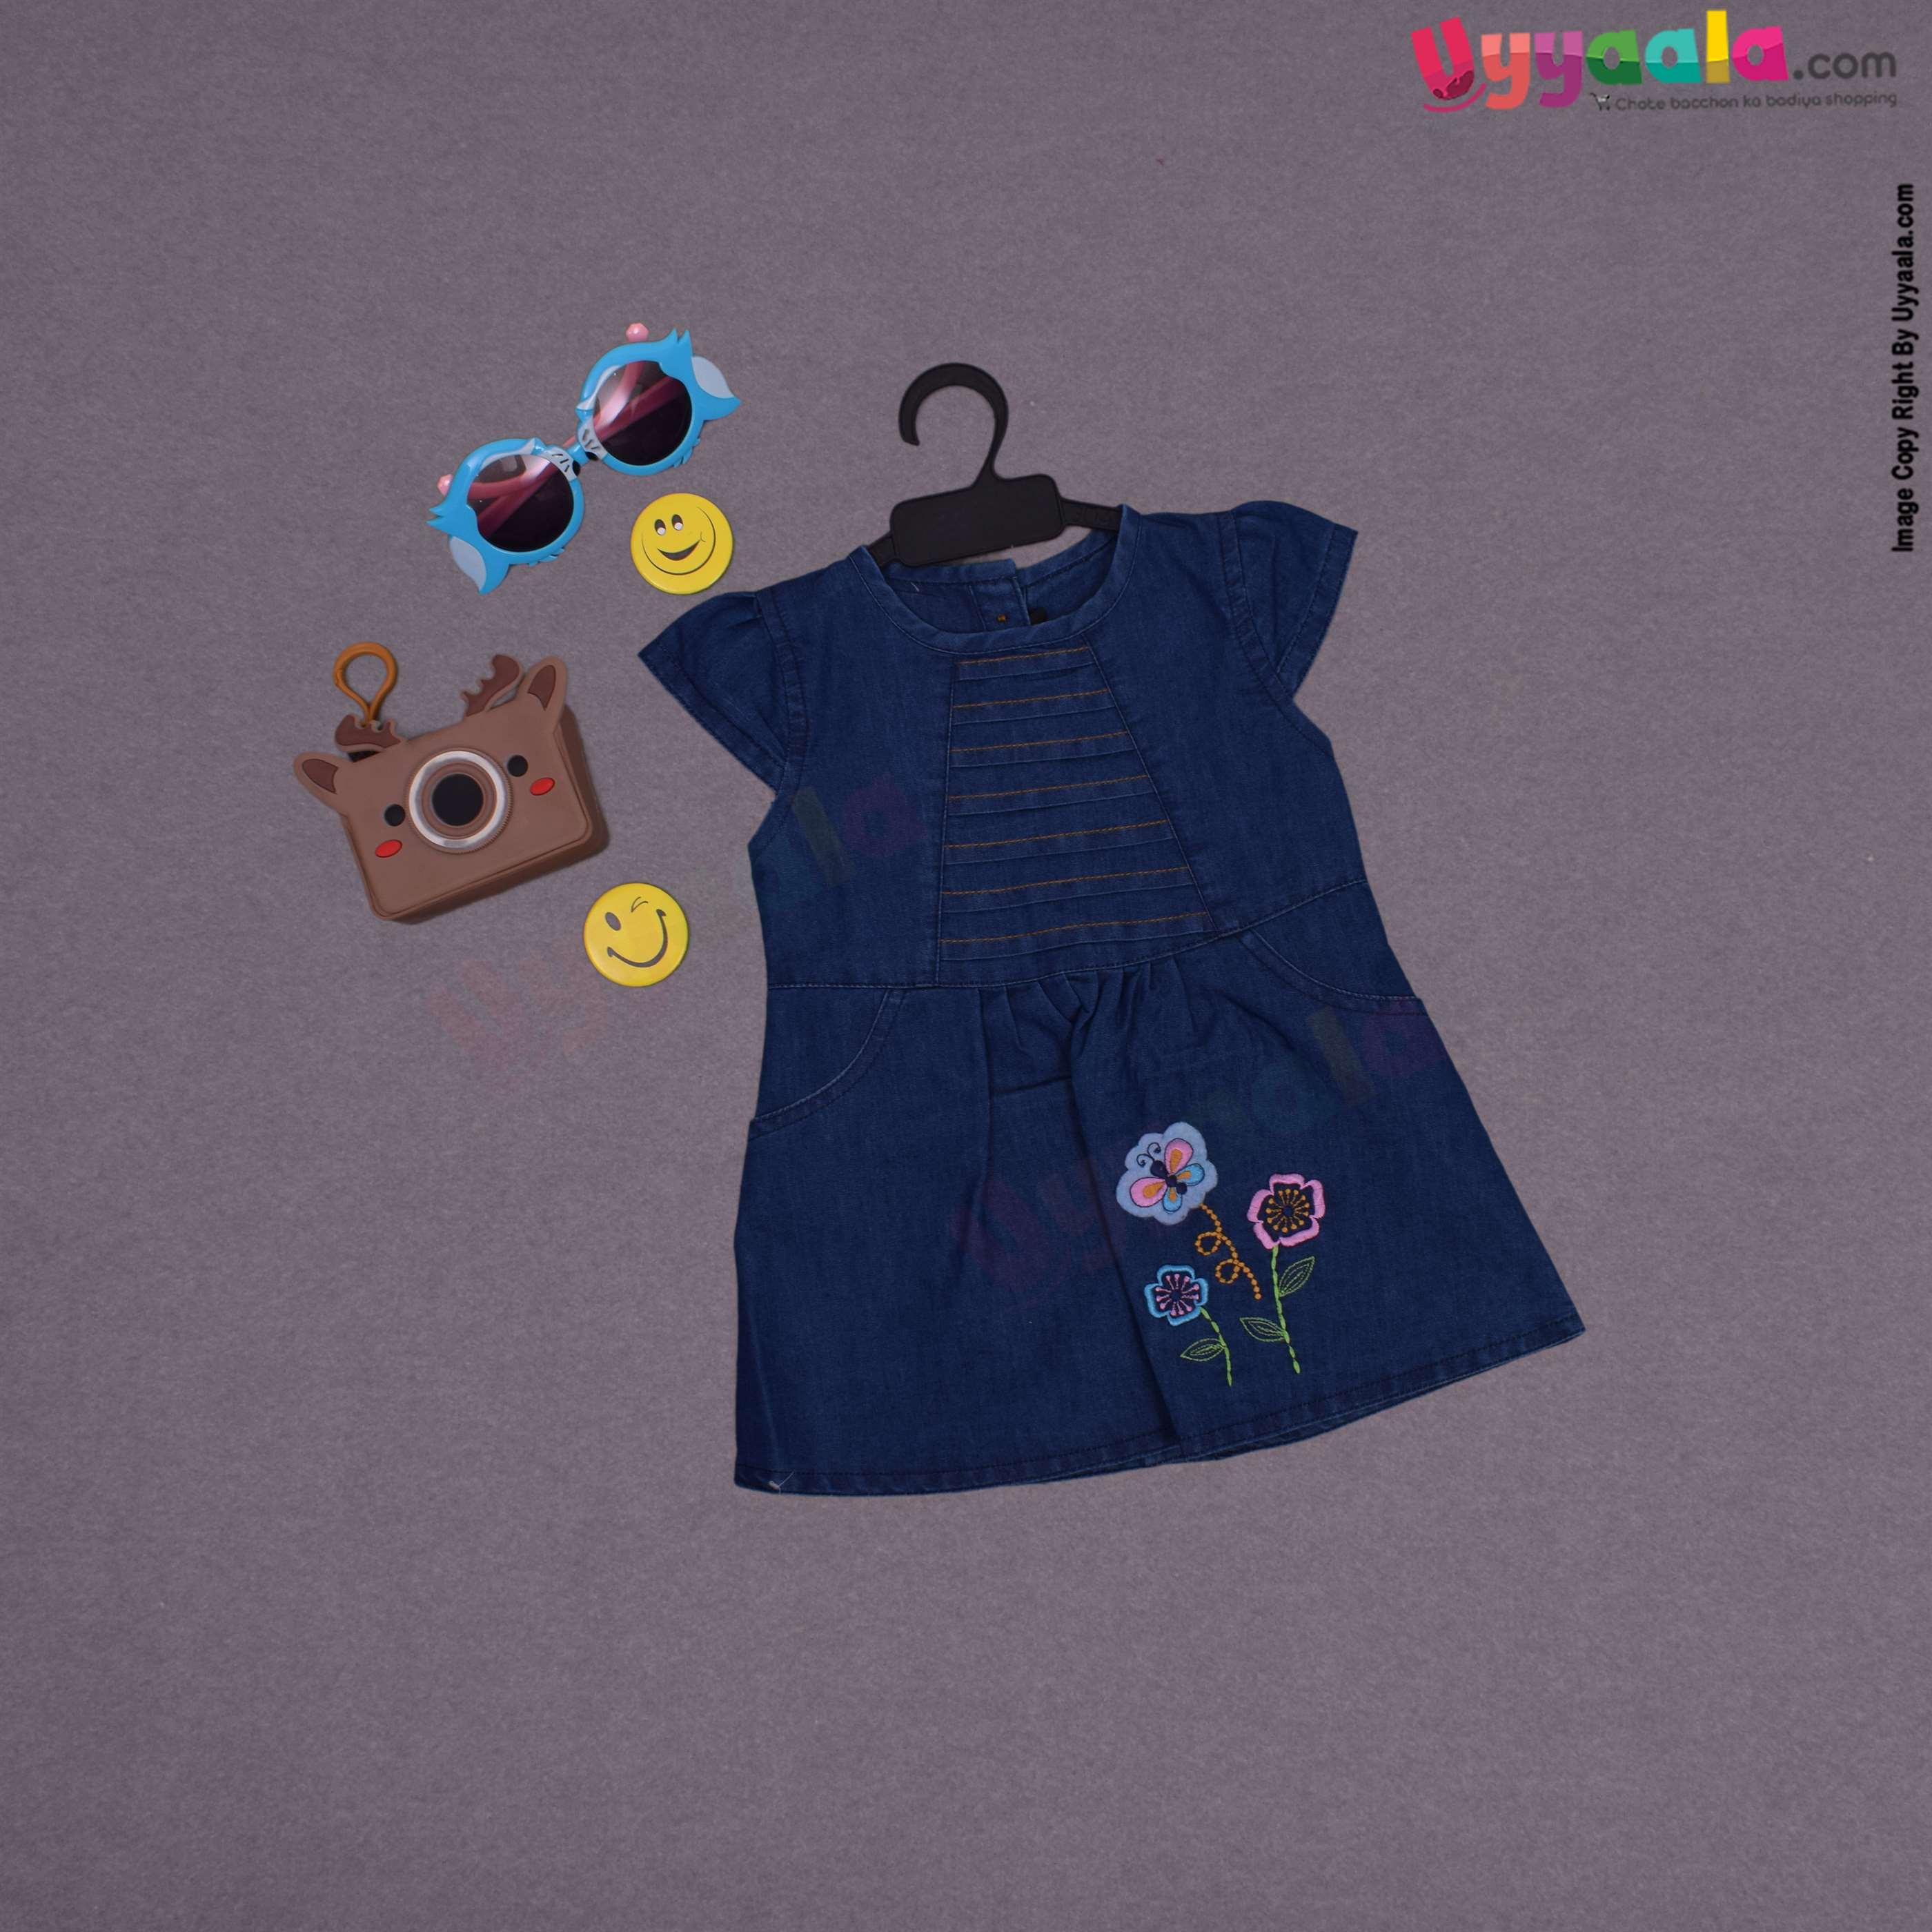 Party wear denim frock for baby girl with Butterfly patch and flowers embroidery